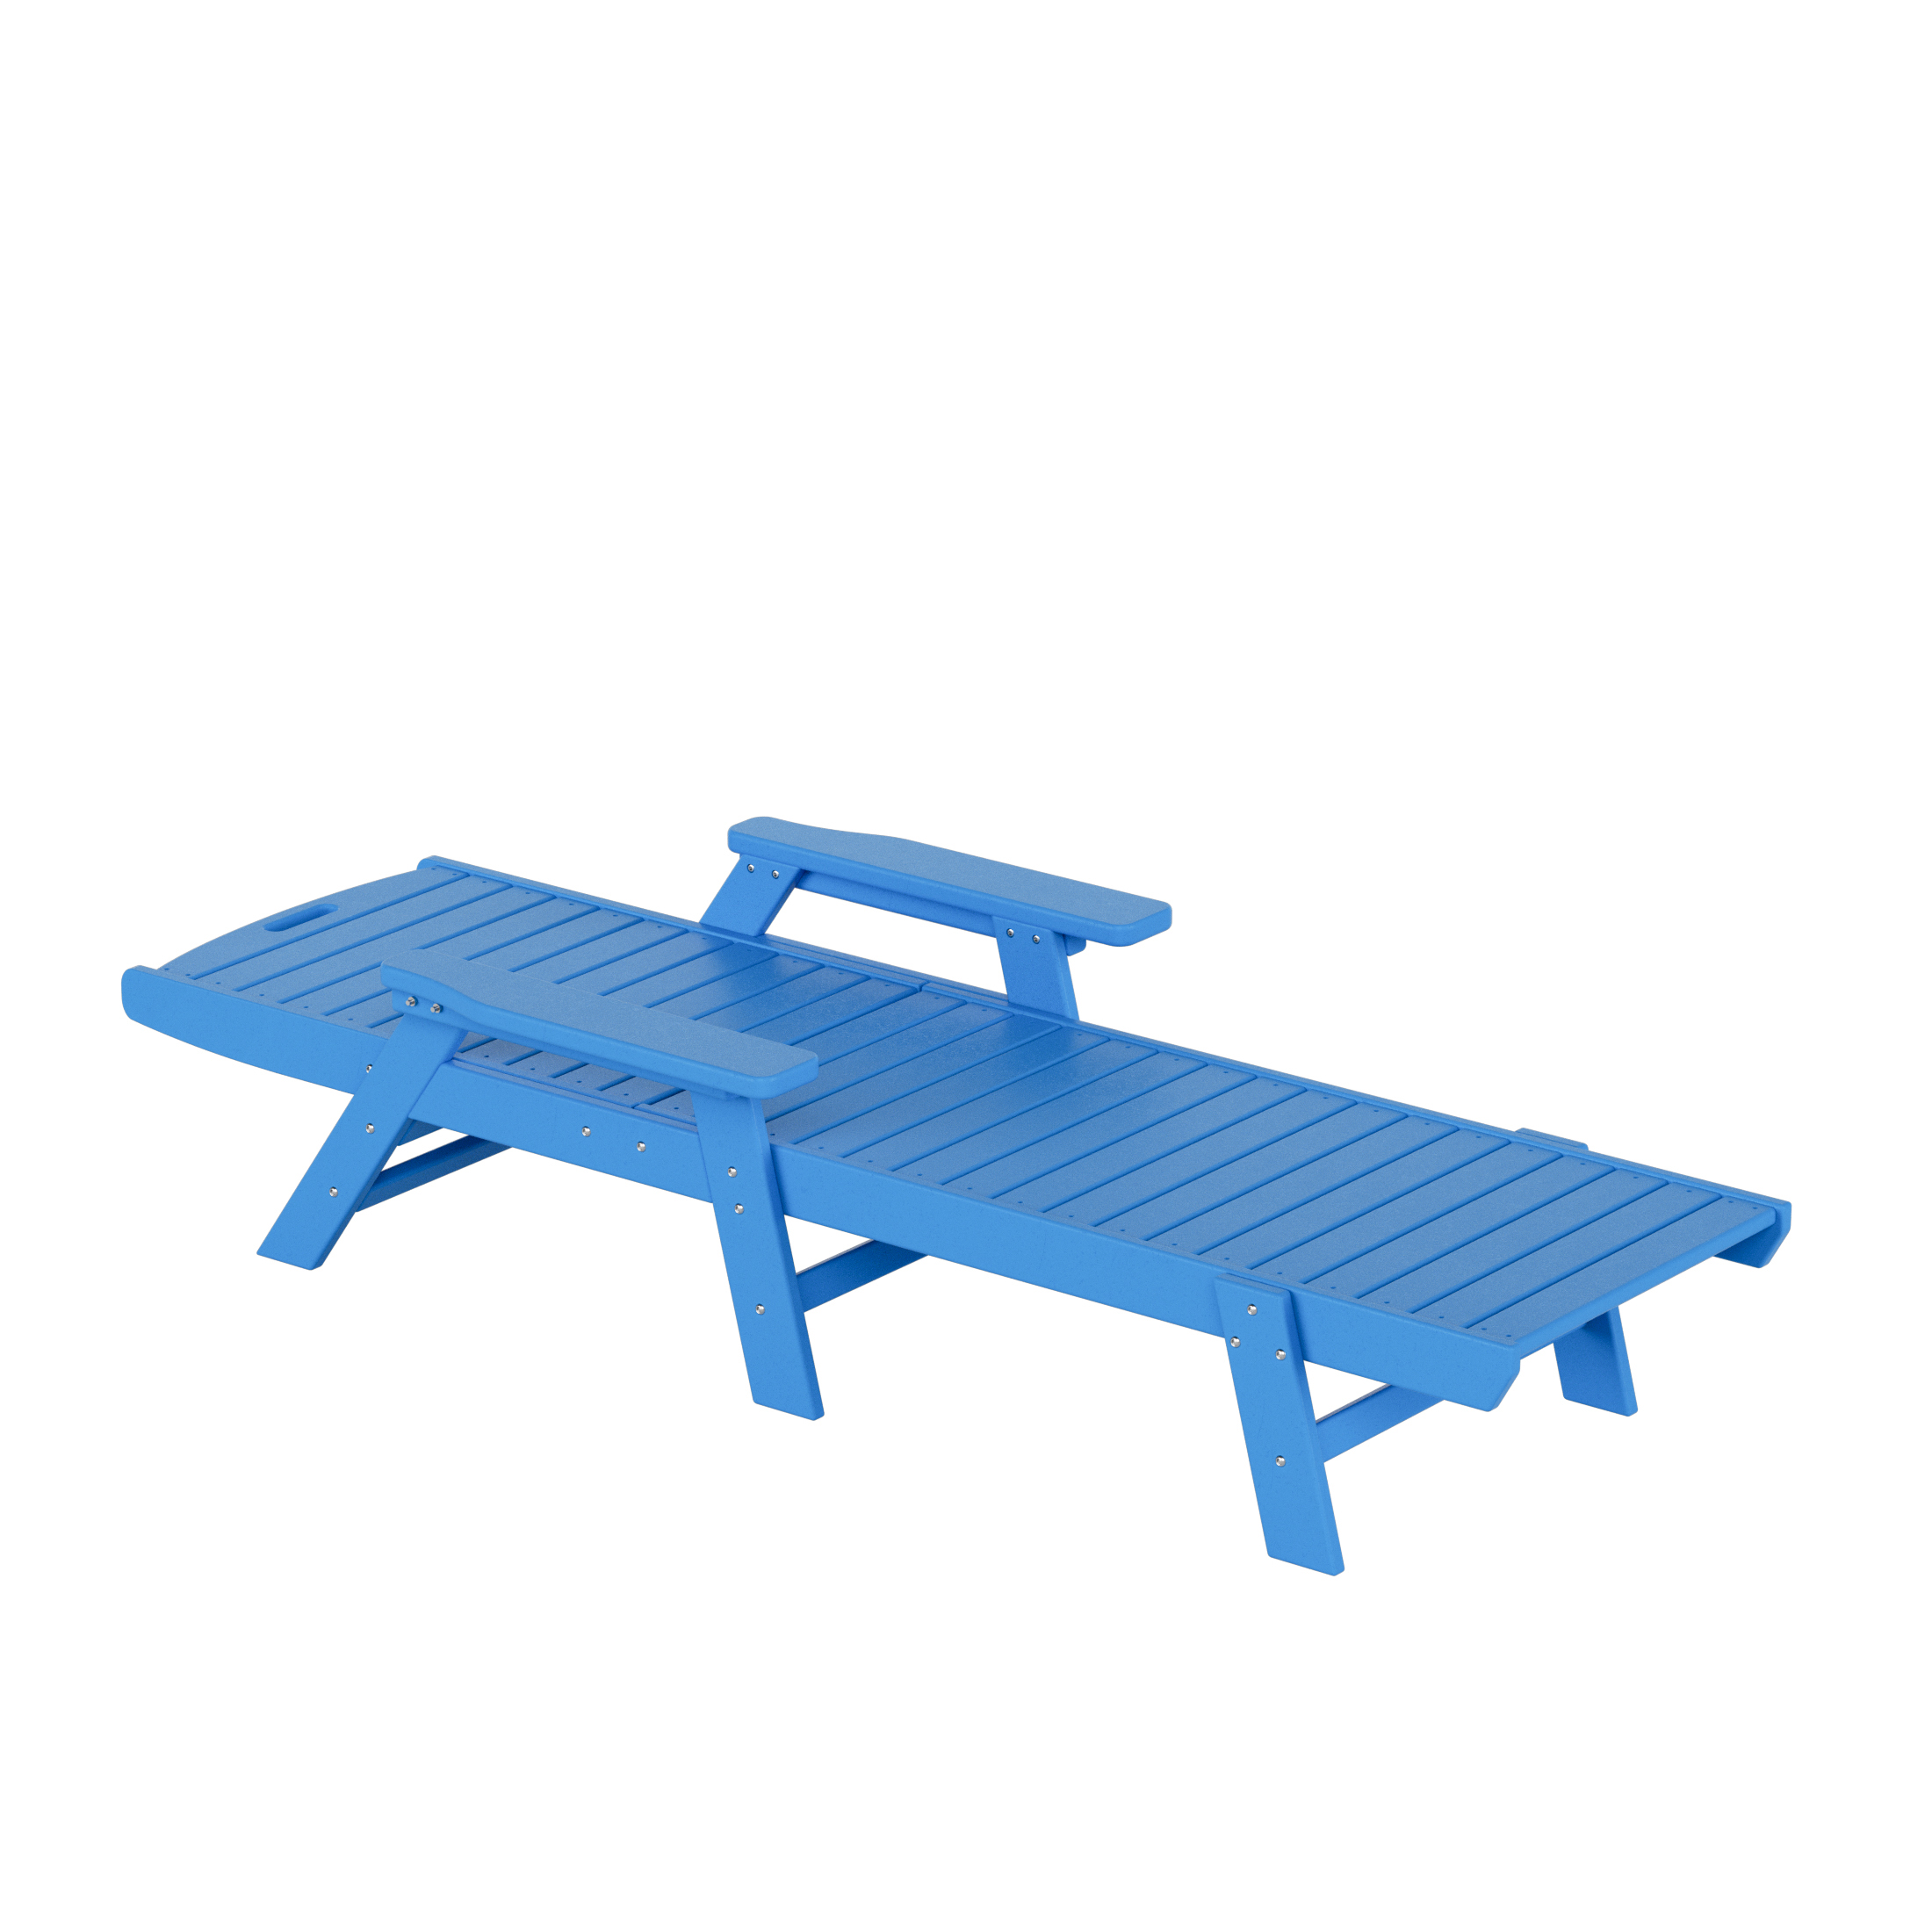 Bayport Outdoor 3PC HDPE Plastic Reclining Chaise Lounge/Table Set Pacific Blue - image 5 of 13